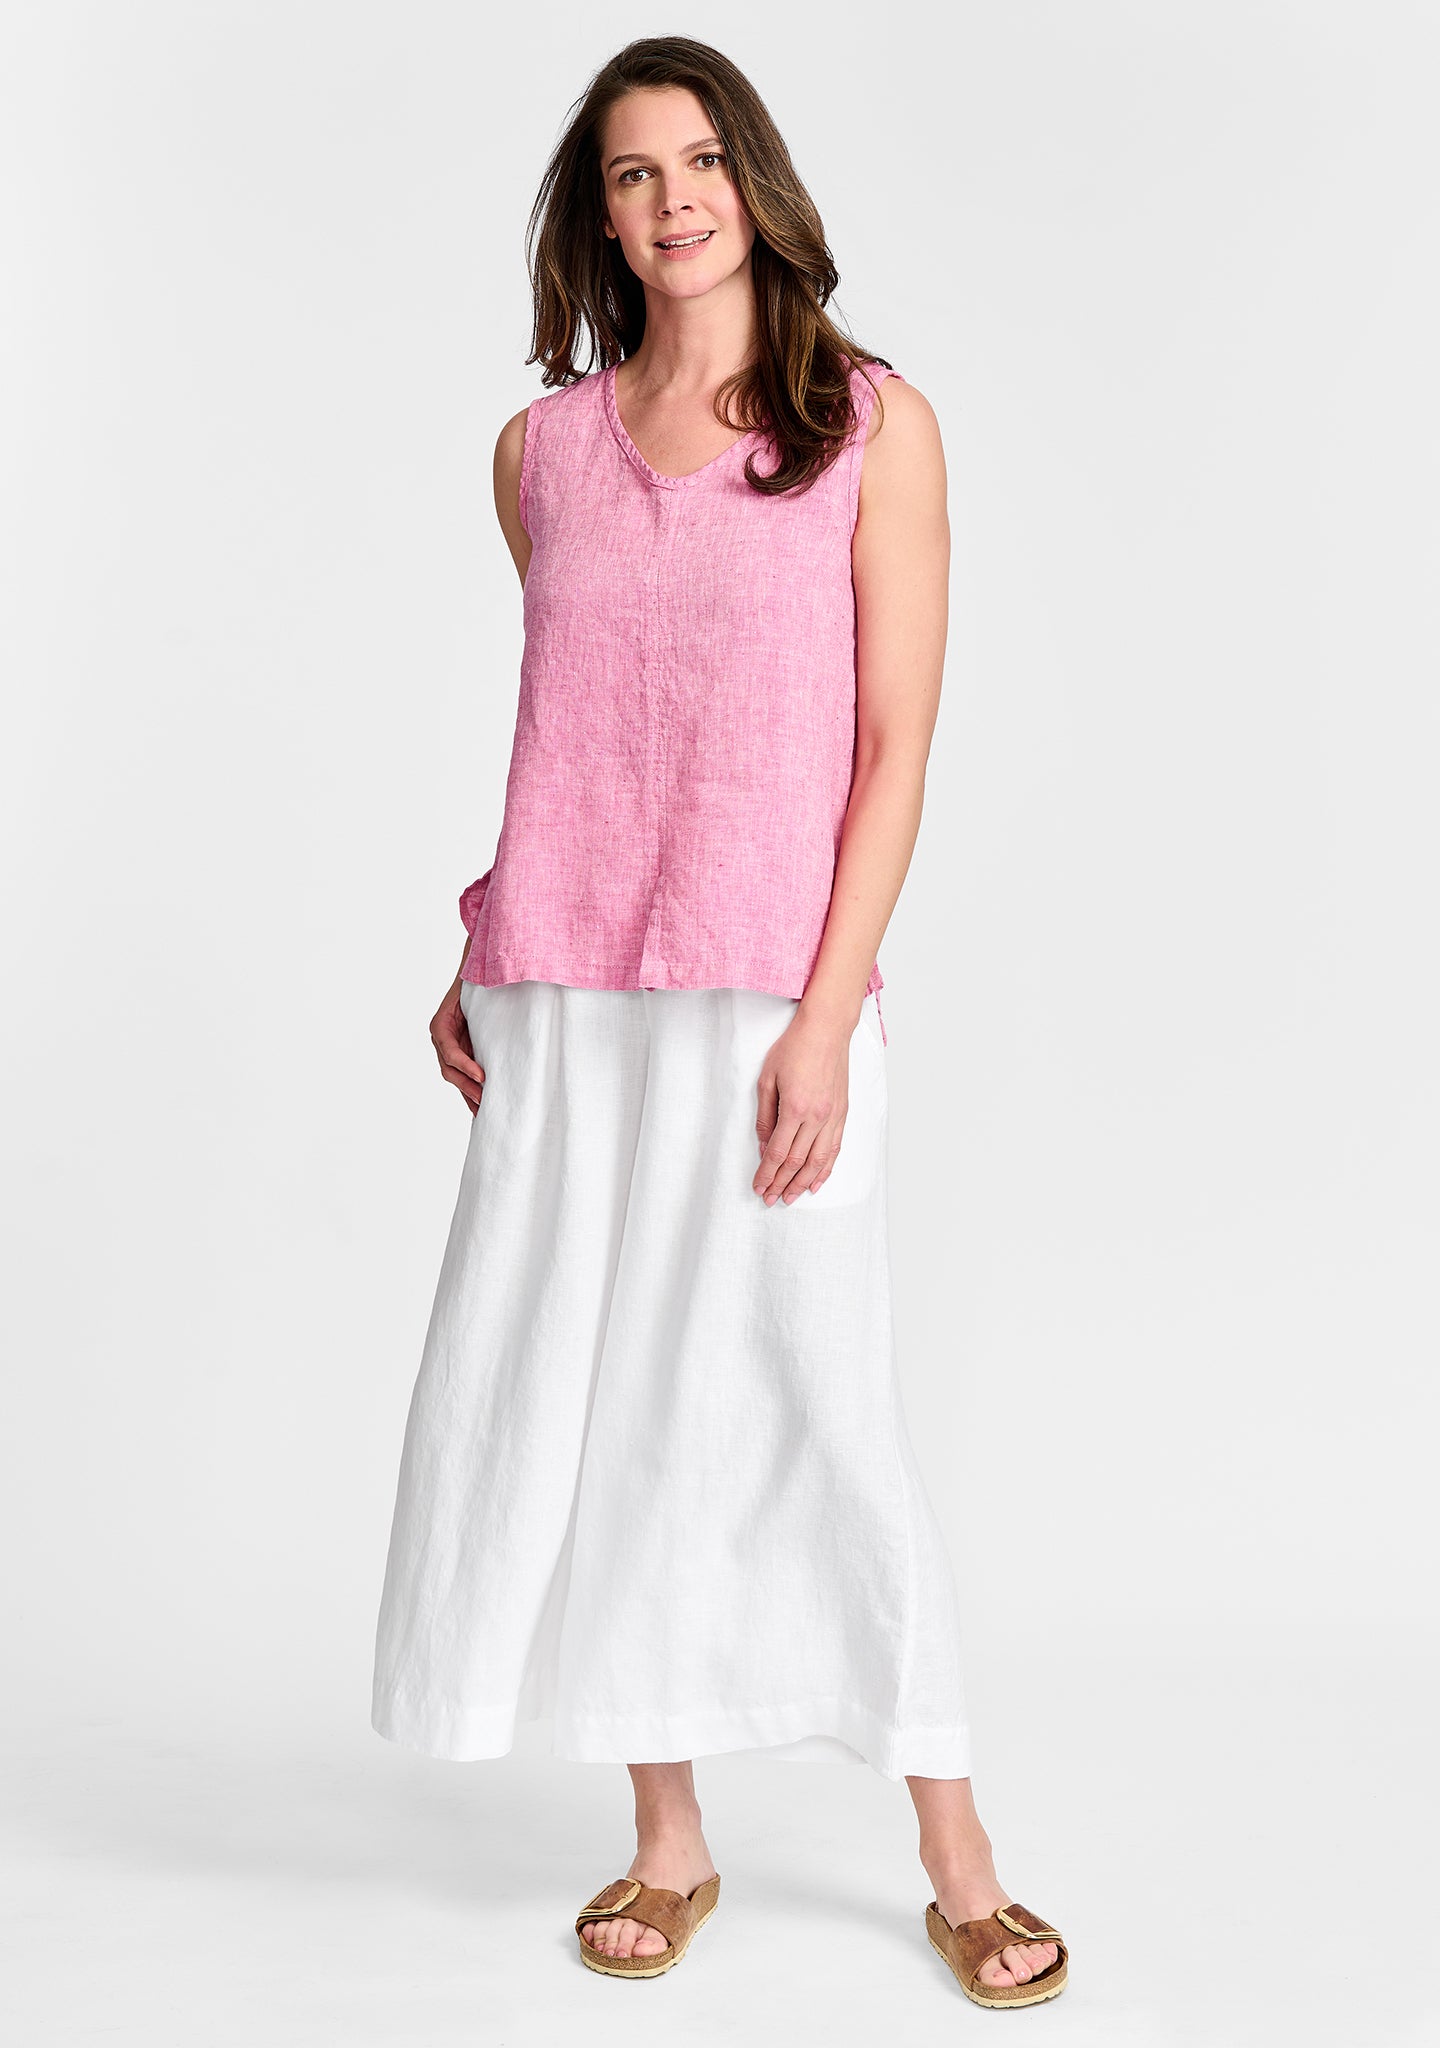 FLAX linen tank in pink with linen pant in white